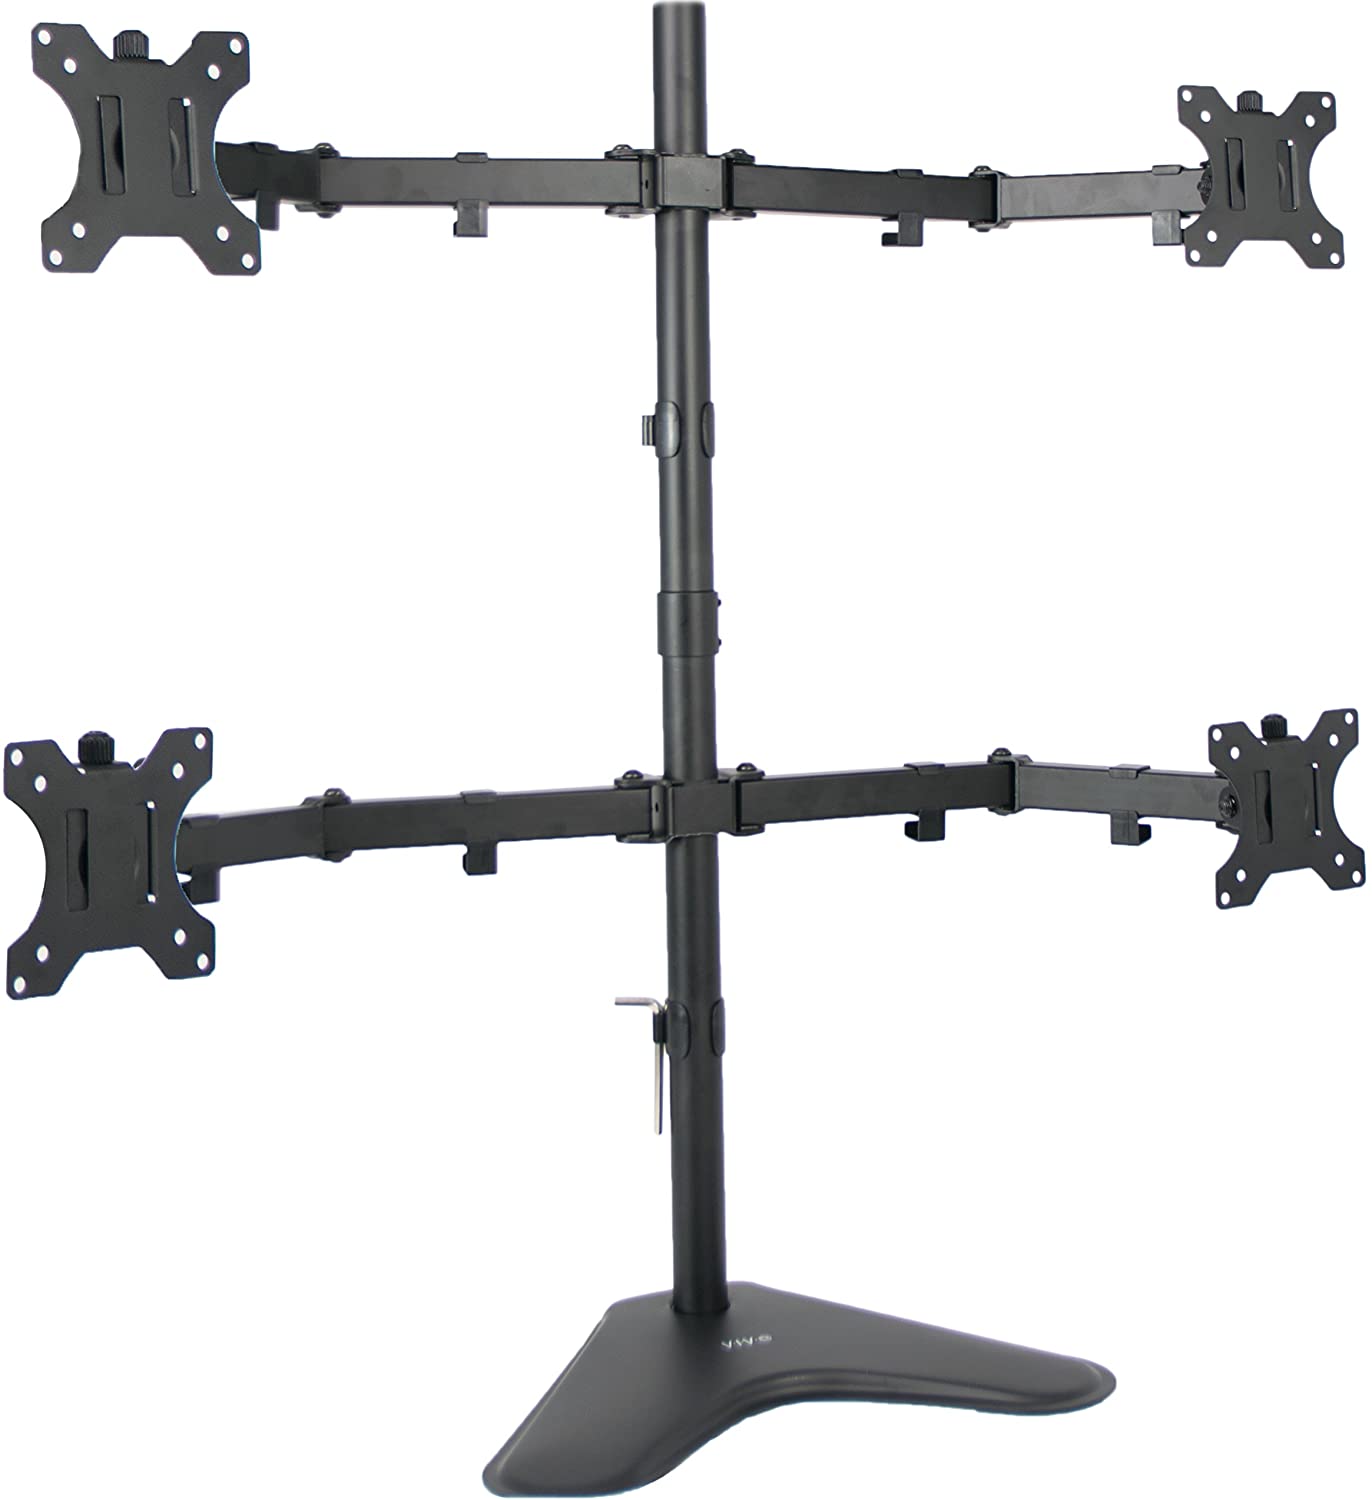 VIVO Quad LCD Computer Monitor Mount Free Standing Heavy Duty Desk Stand